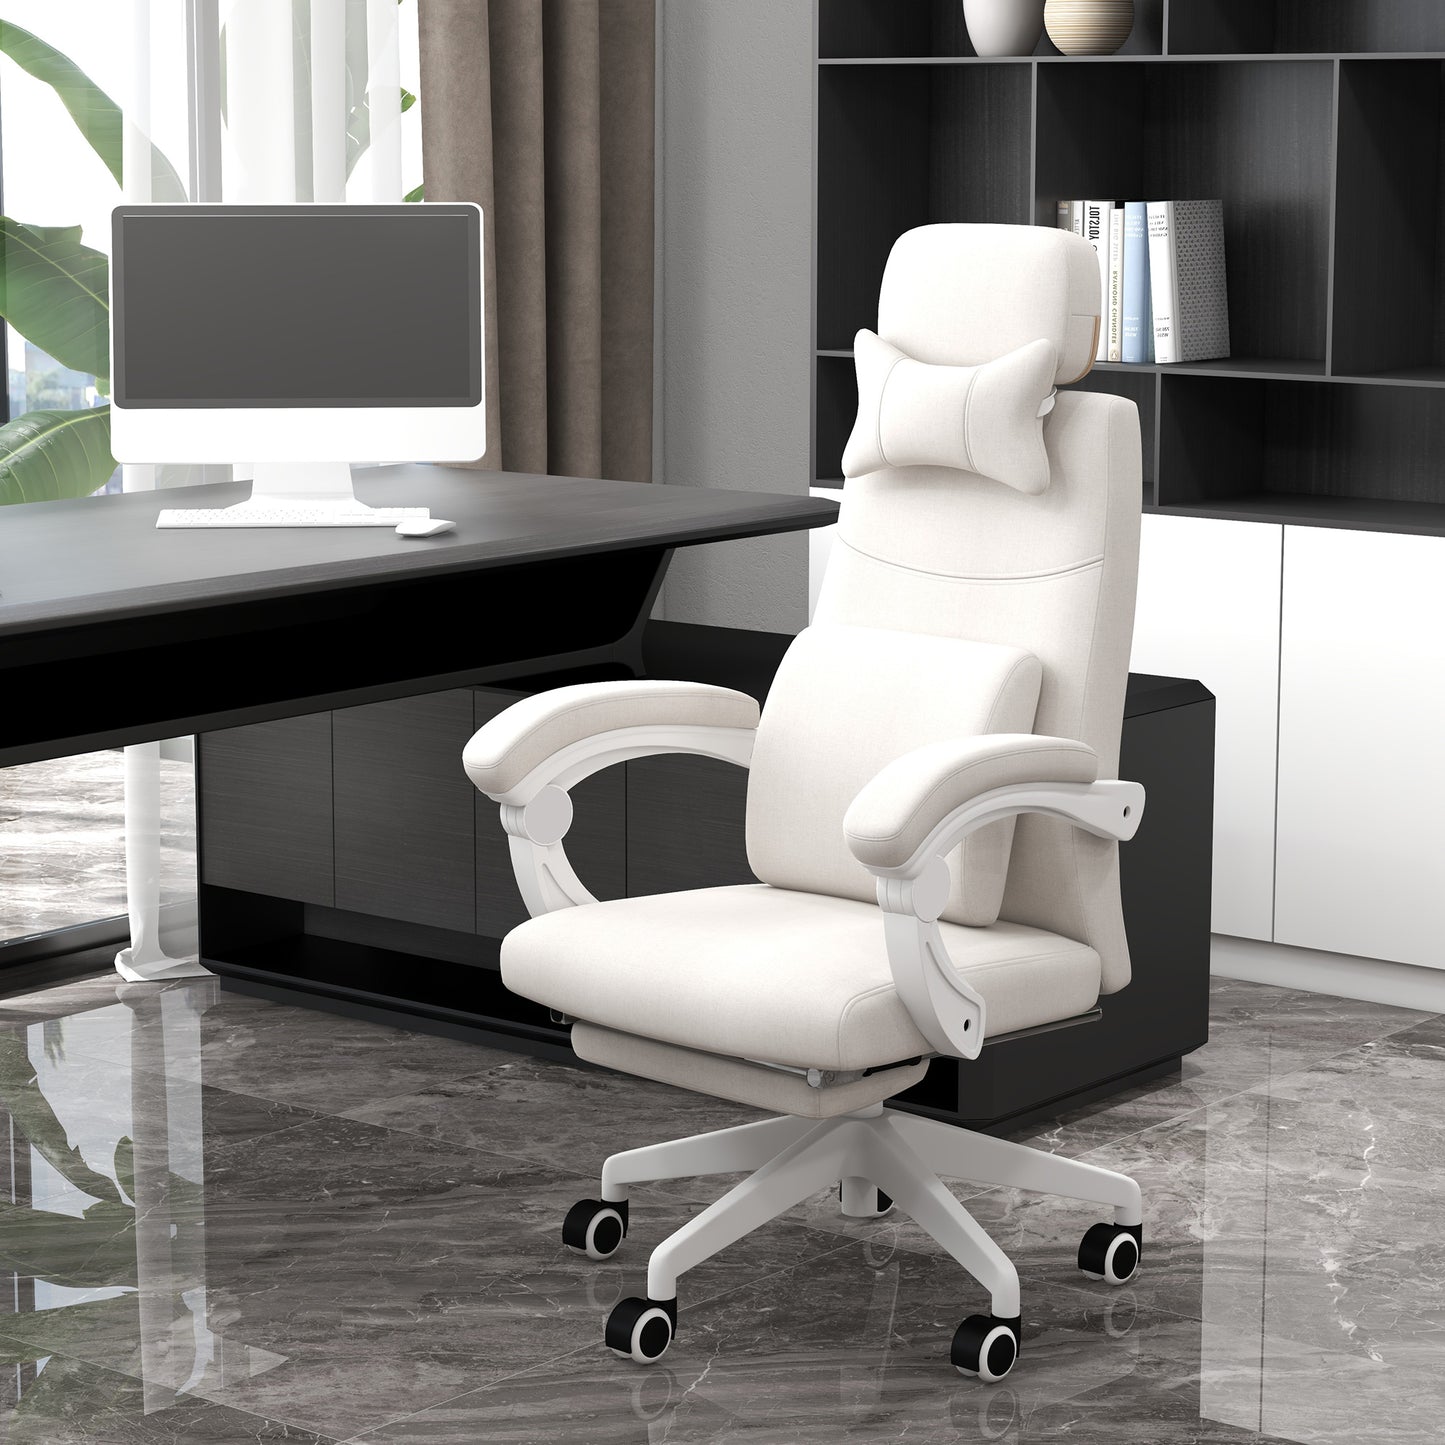 Vinsetto High Back Office Chair Reclining Computer Chair with Footrest Lumbar Support Adjustable Height Swivel Wheels White